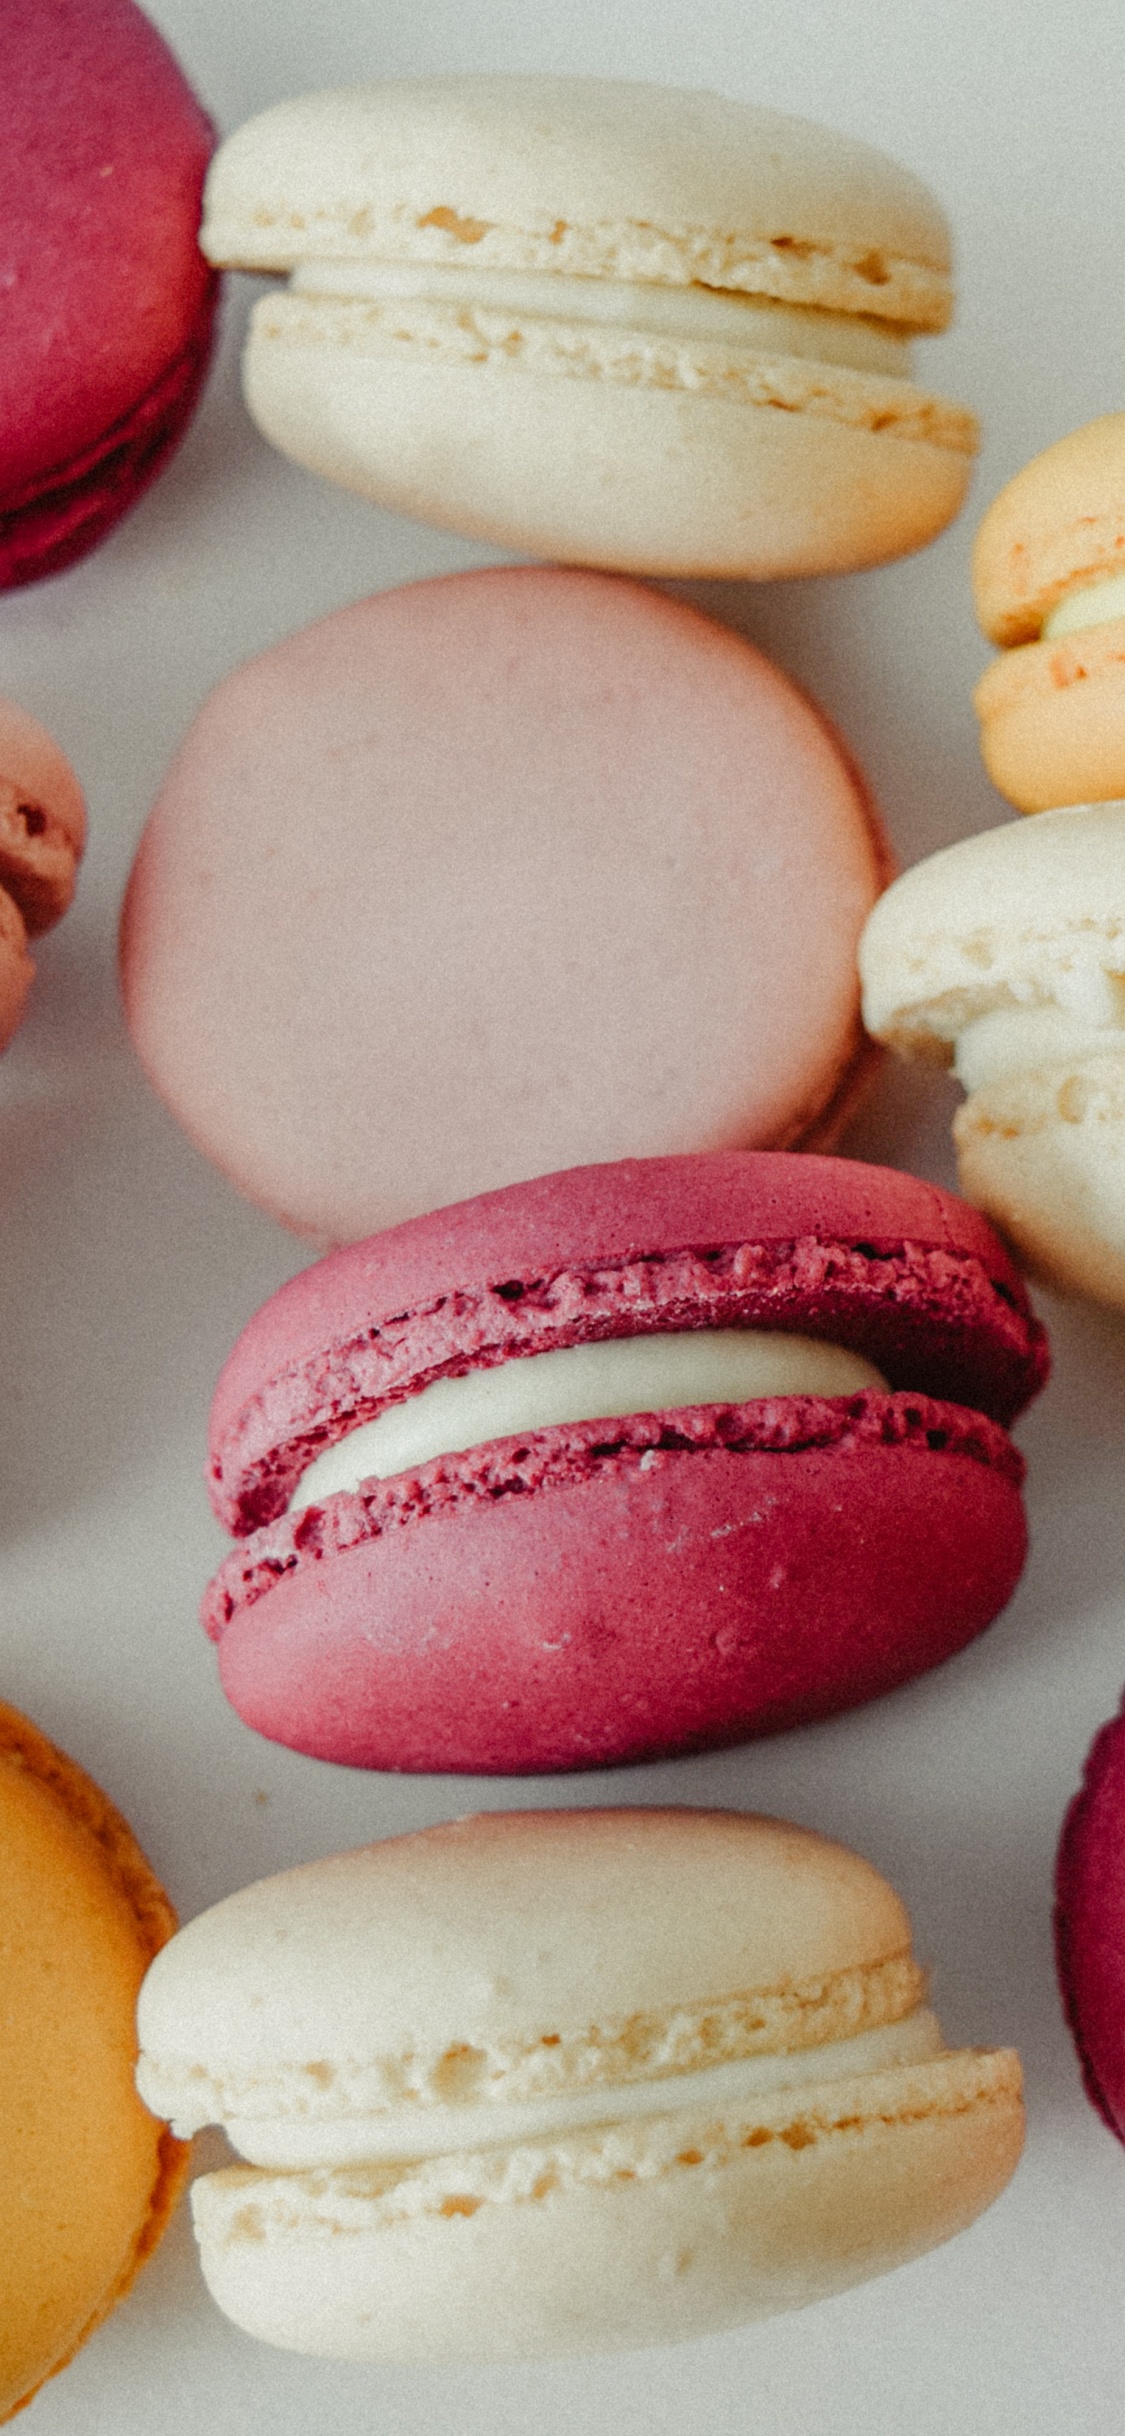 Pink Yellow and White Macaroons. Wallpaper in 1125x2436 Resolution